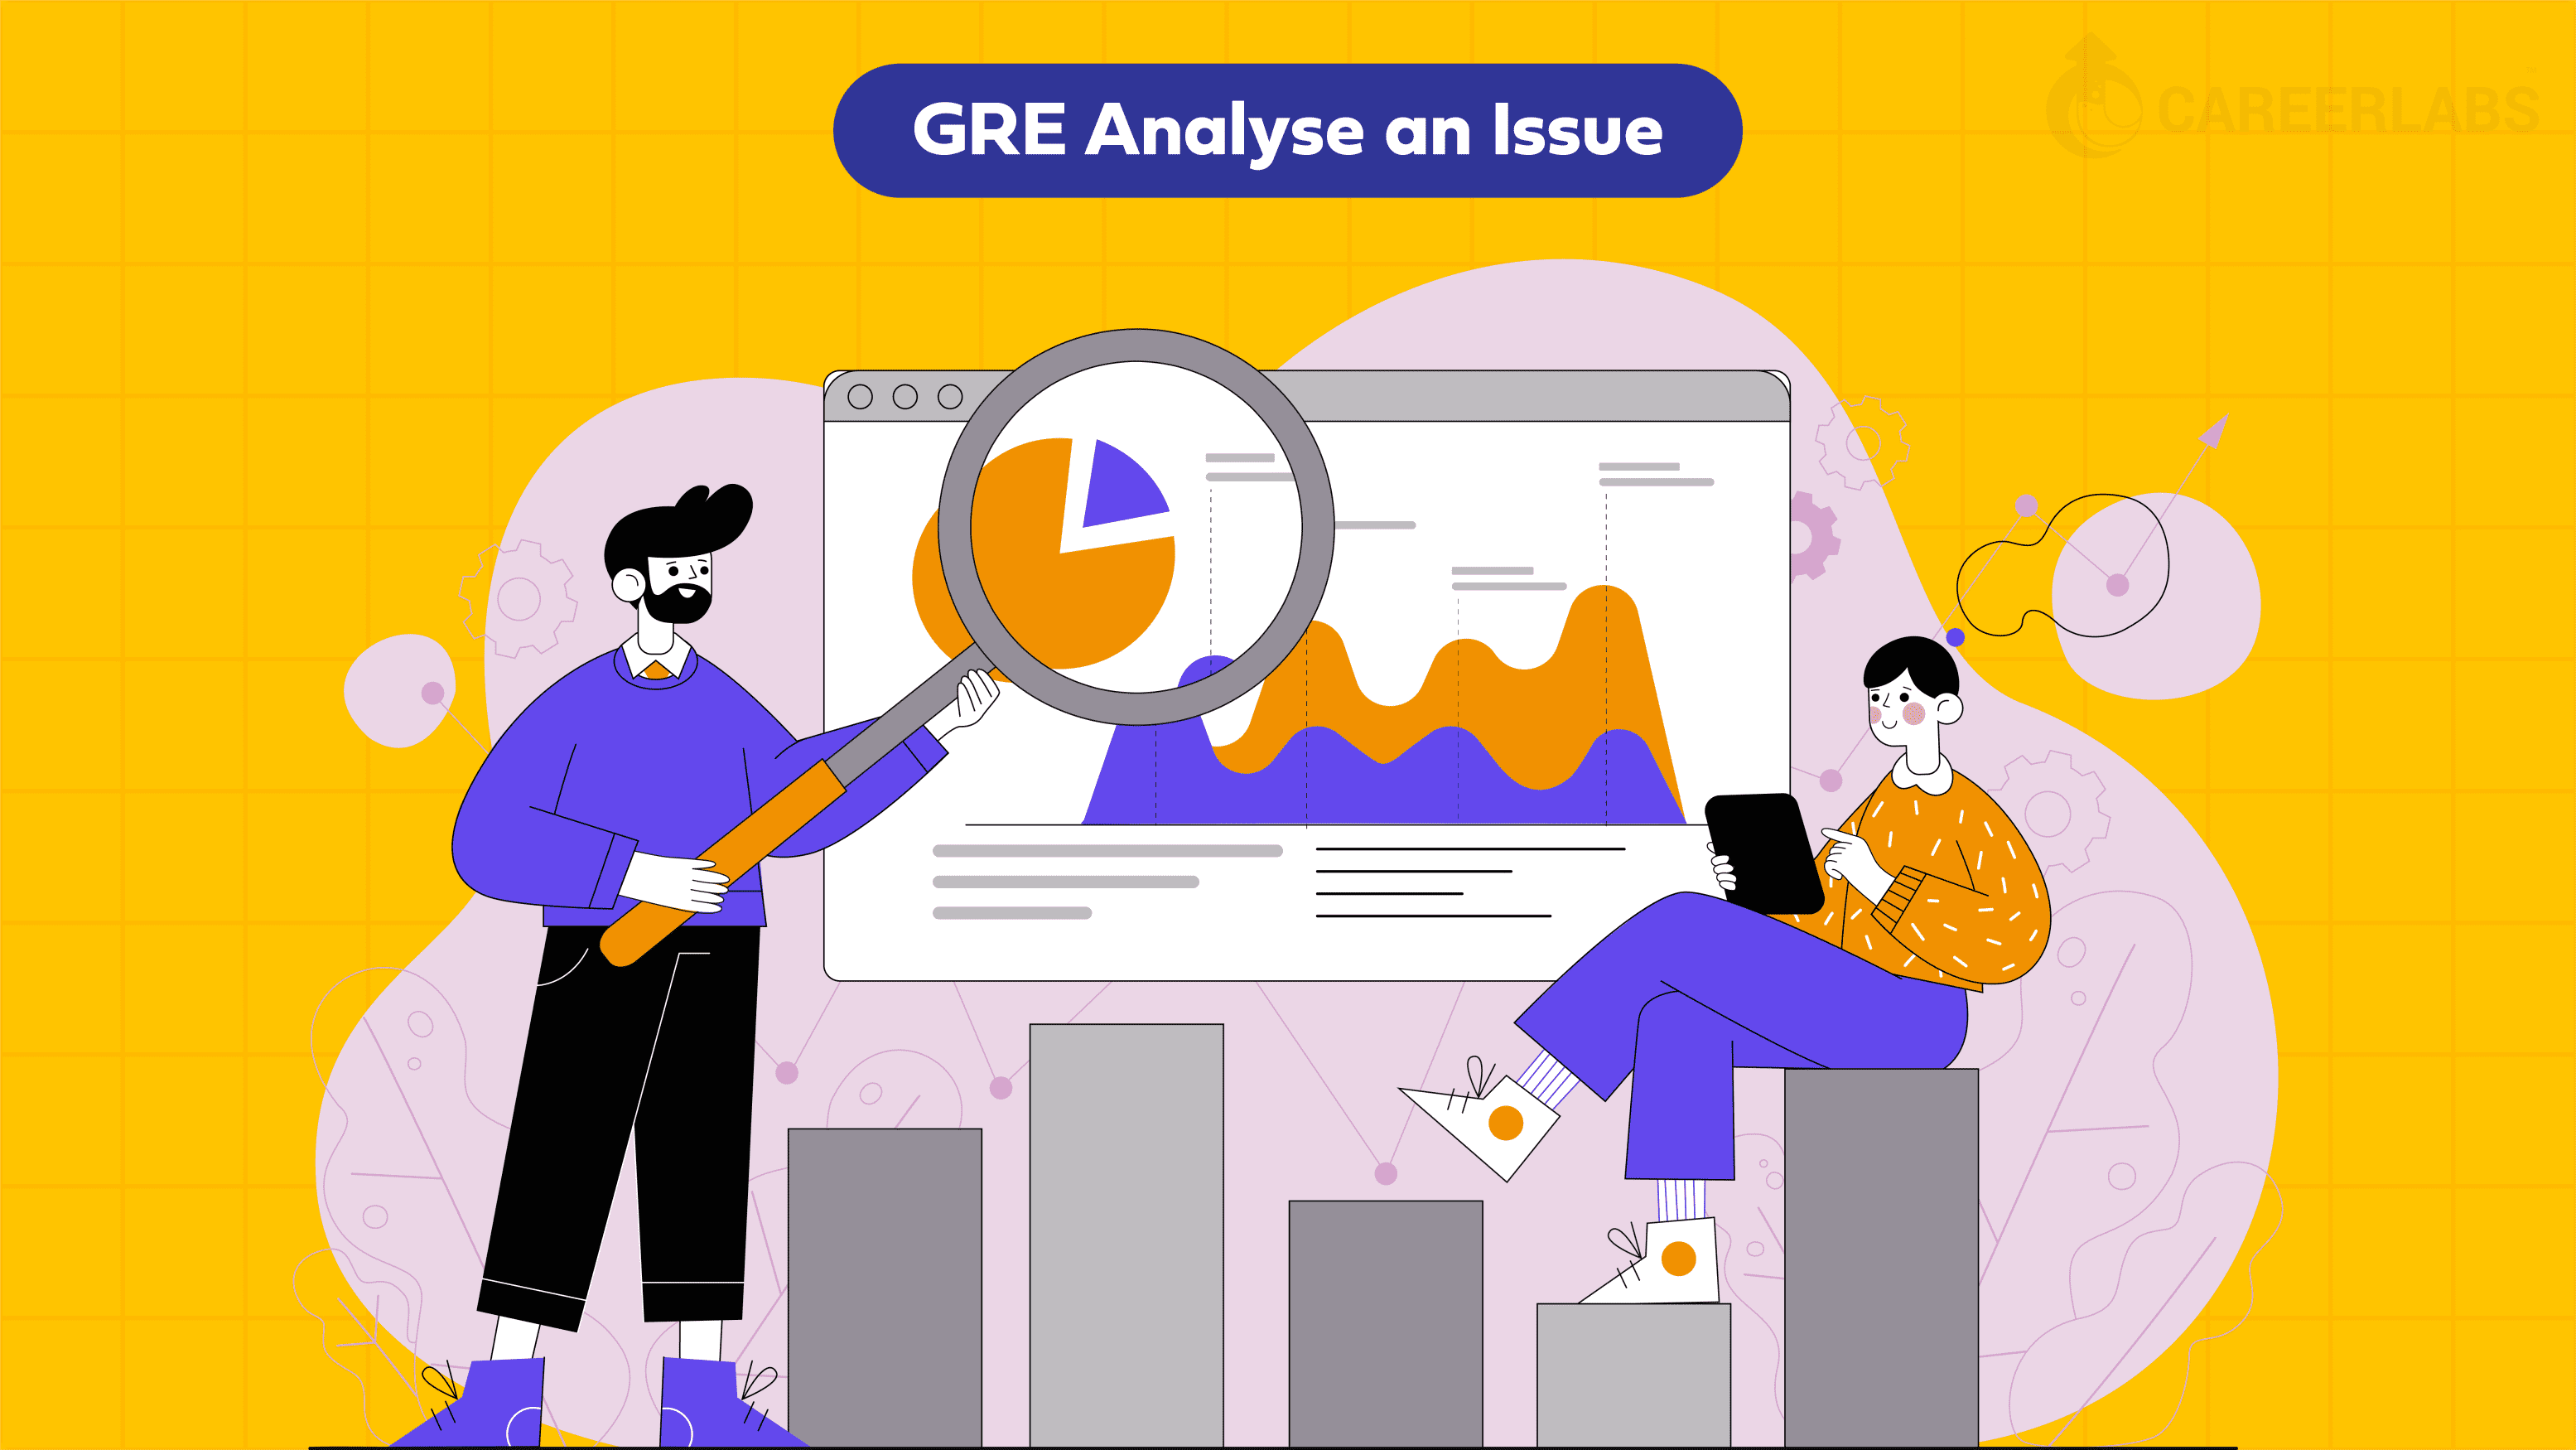 GRE Analyse an Issue